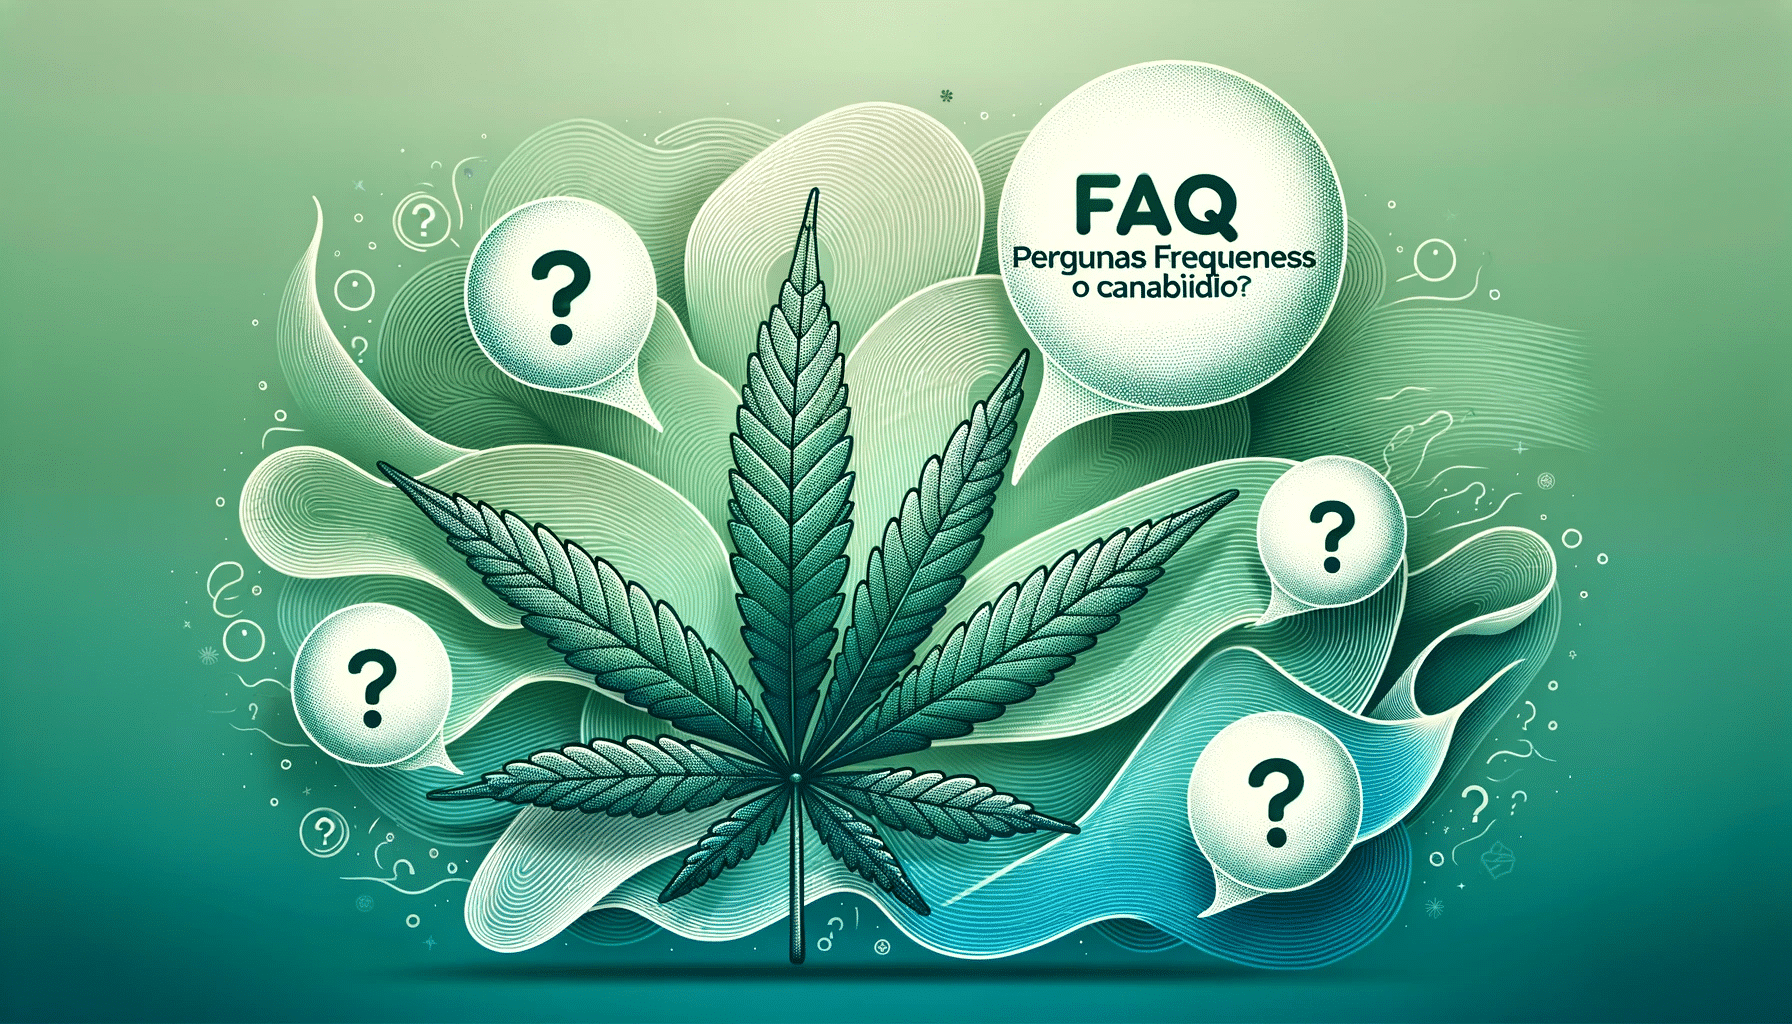 2023 10 14 13.03.57 Wide illustration with a gradient background transitioning from green to blue. In the center a detailed drawing of a CBD leaf is depicted. Above and